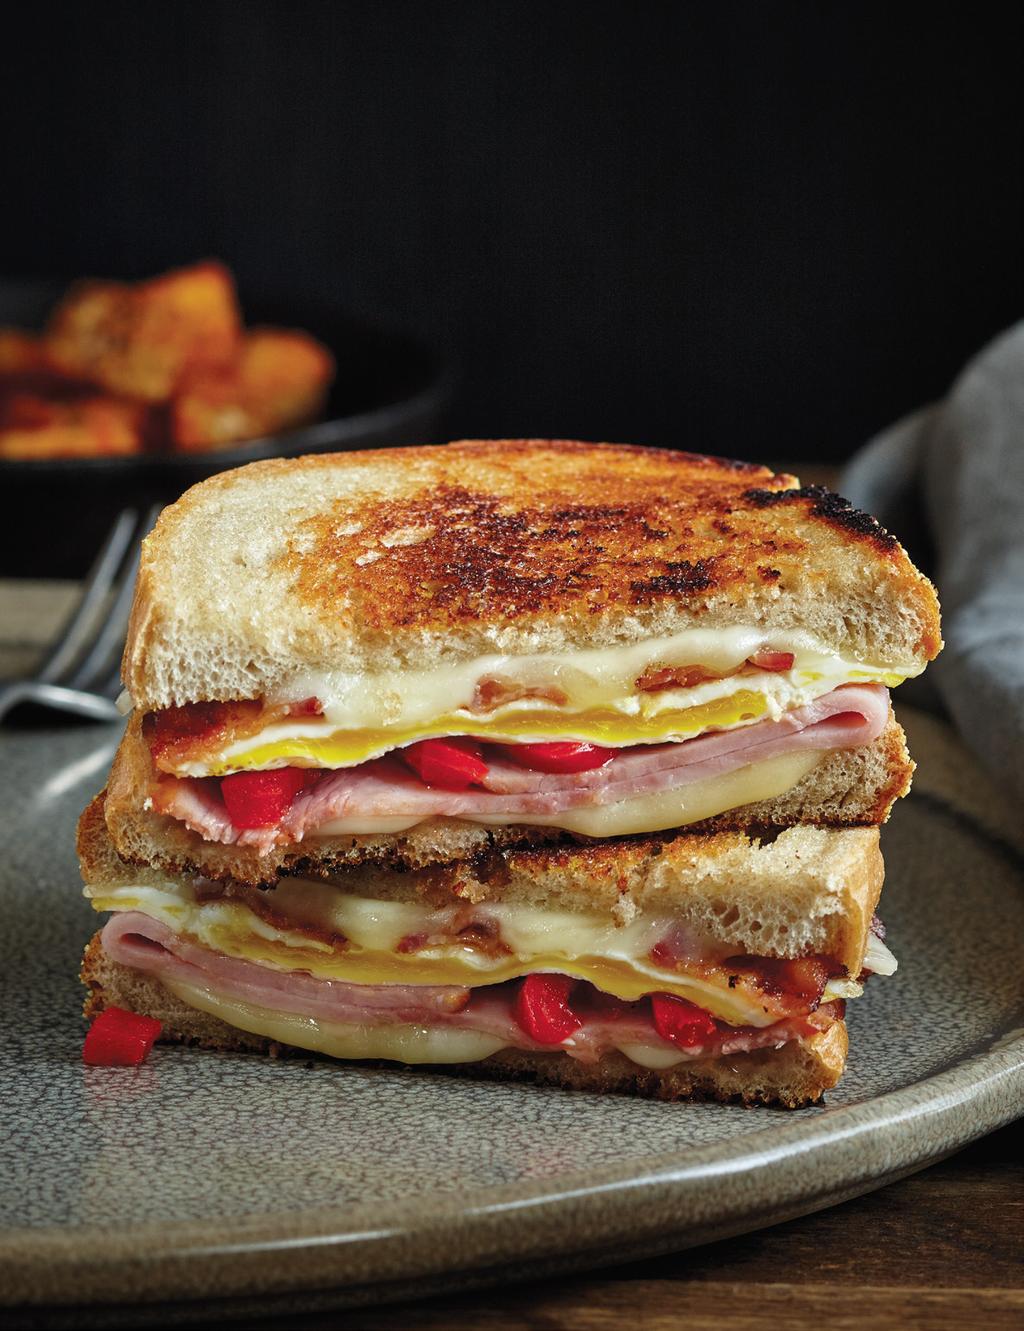 NEW ITEM GRILLED SANDWICH Egg, bacon, ham, roasted red peppers and Swiss cheese on rye